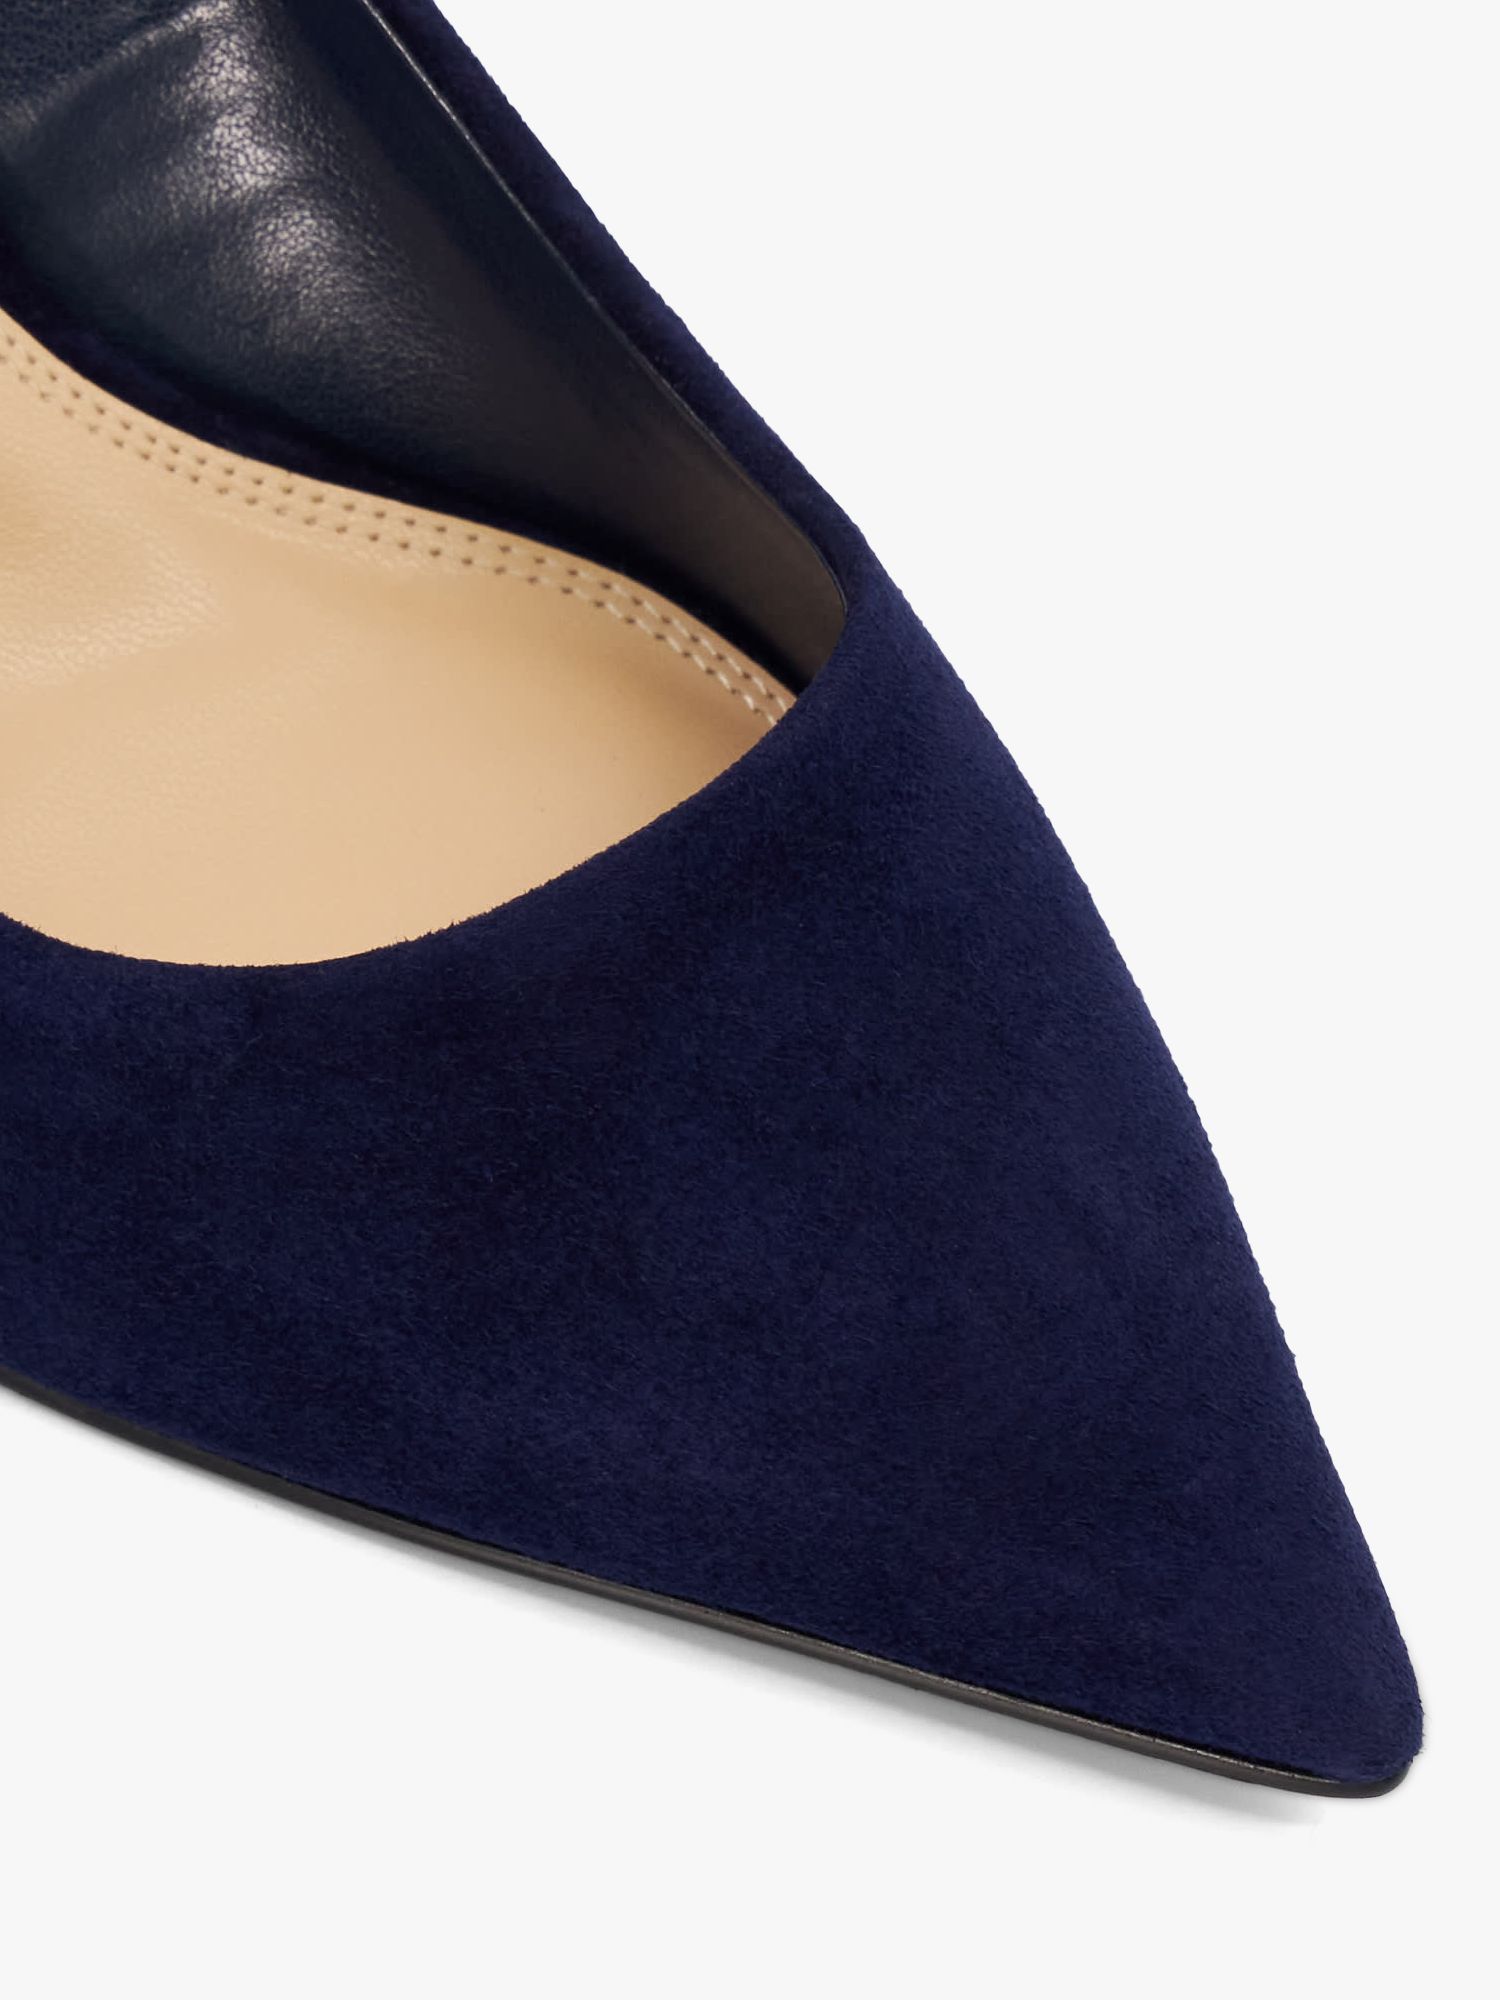 Dune Absolute Suede Pointed Toe Court Shoes, Navy, EU36